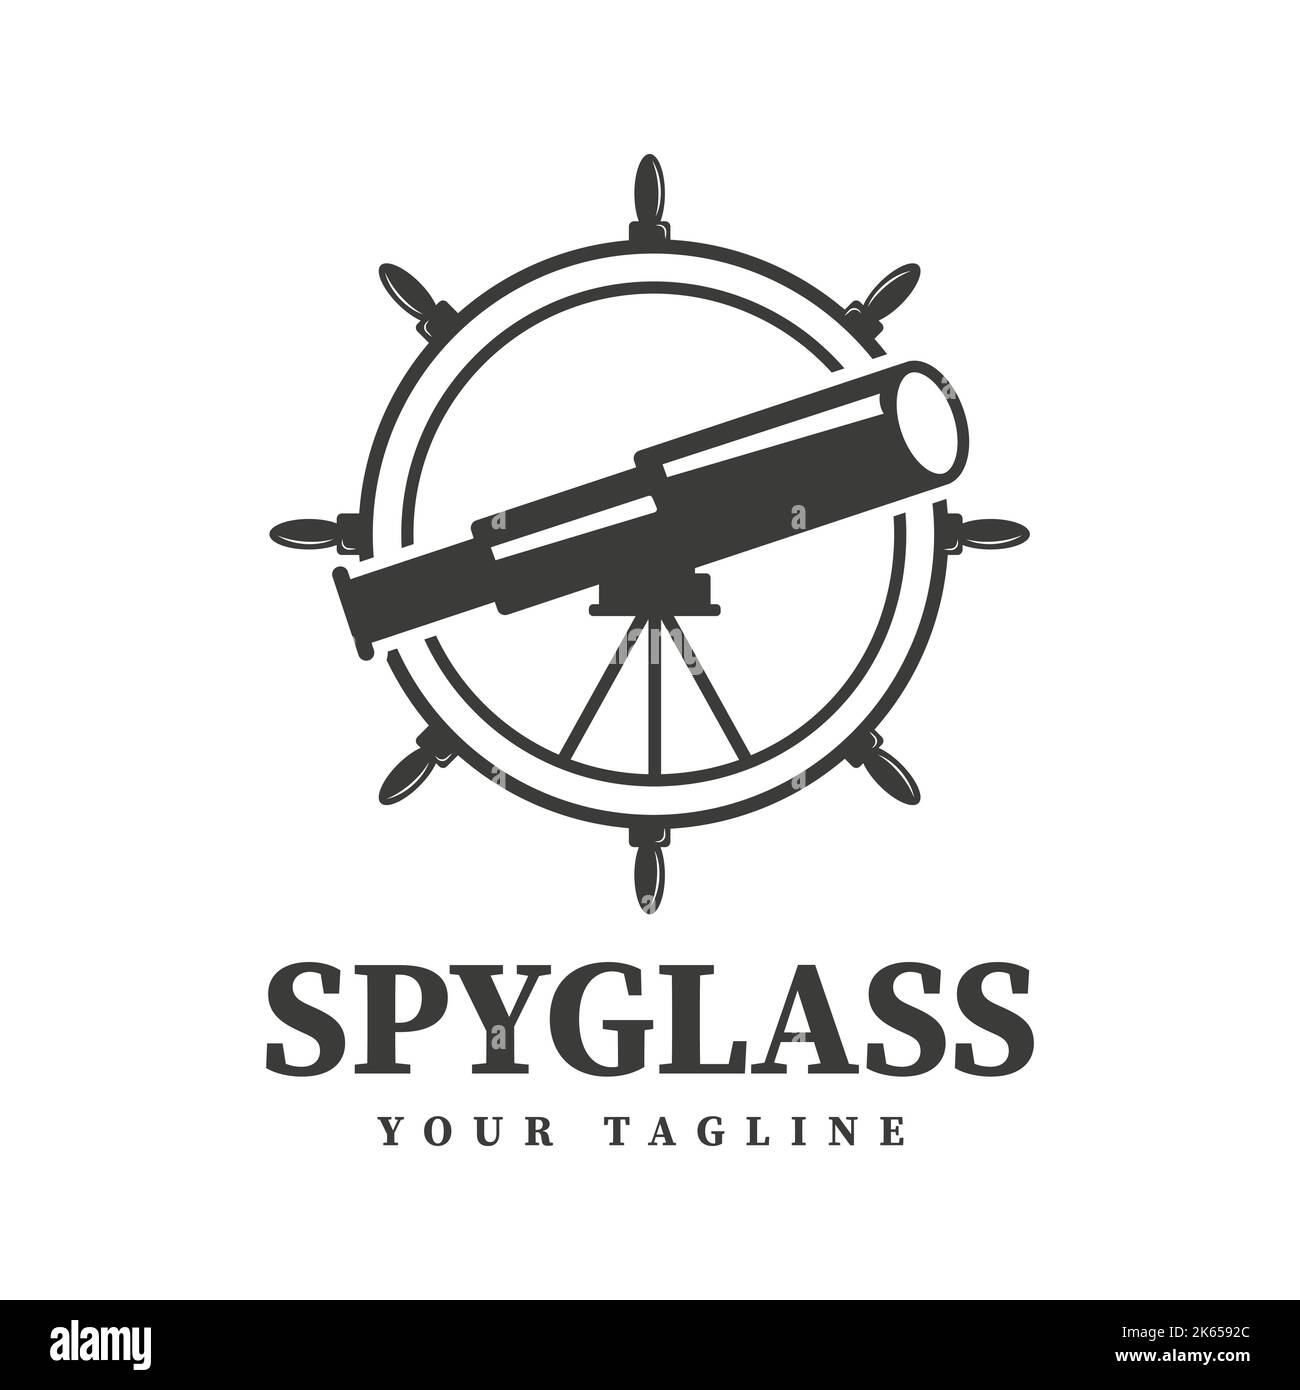 Vintage logo Vector nautical spyglass icon Marine Labels, badges, posters. Vector illustration Stock Vector